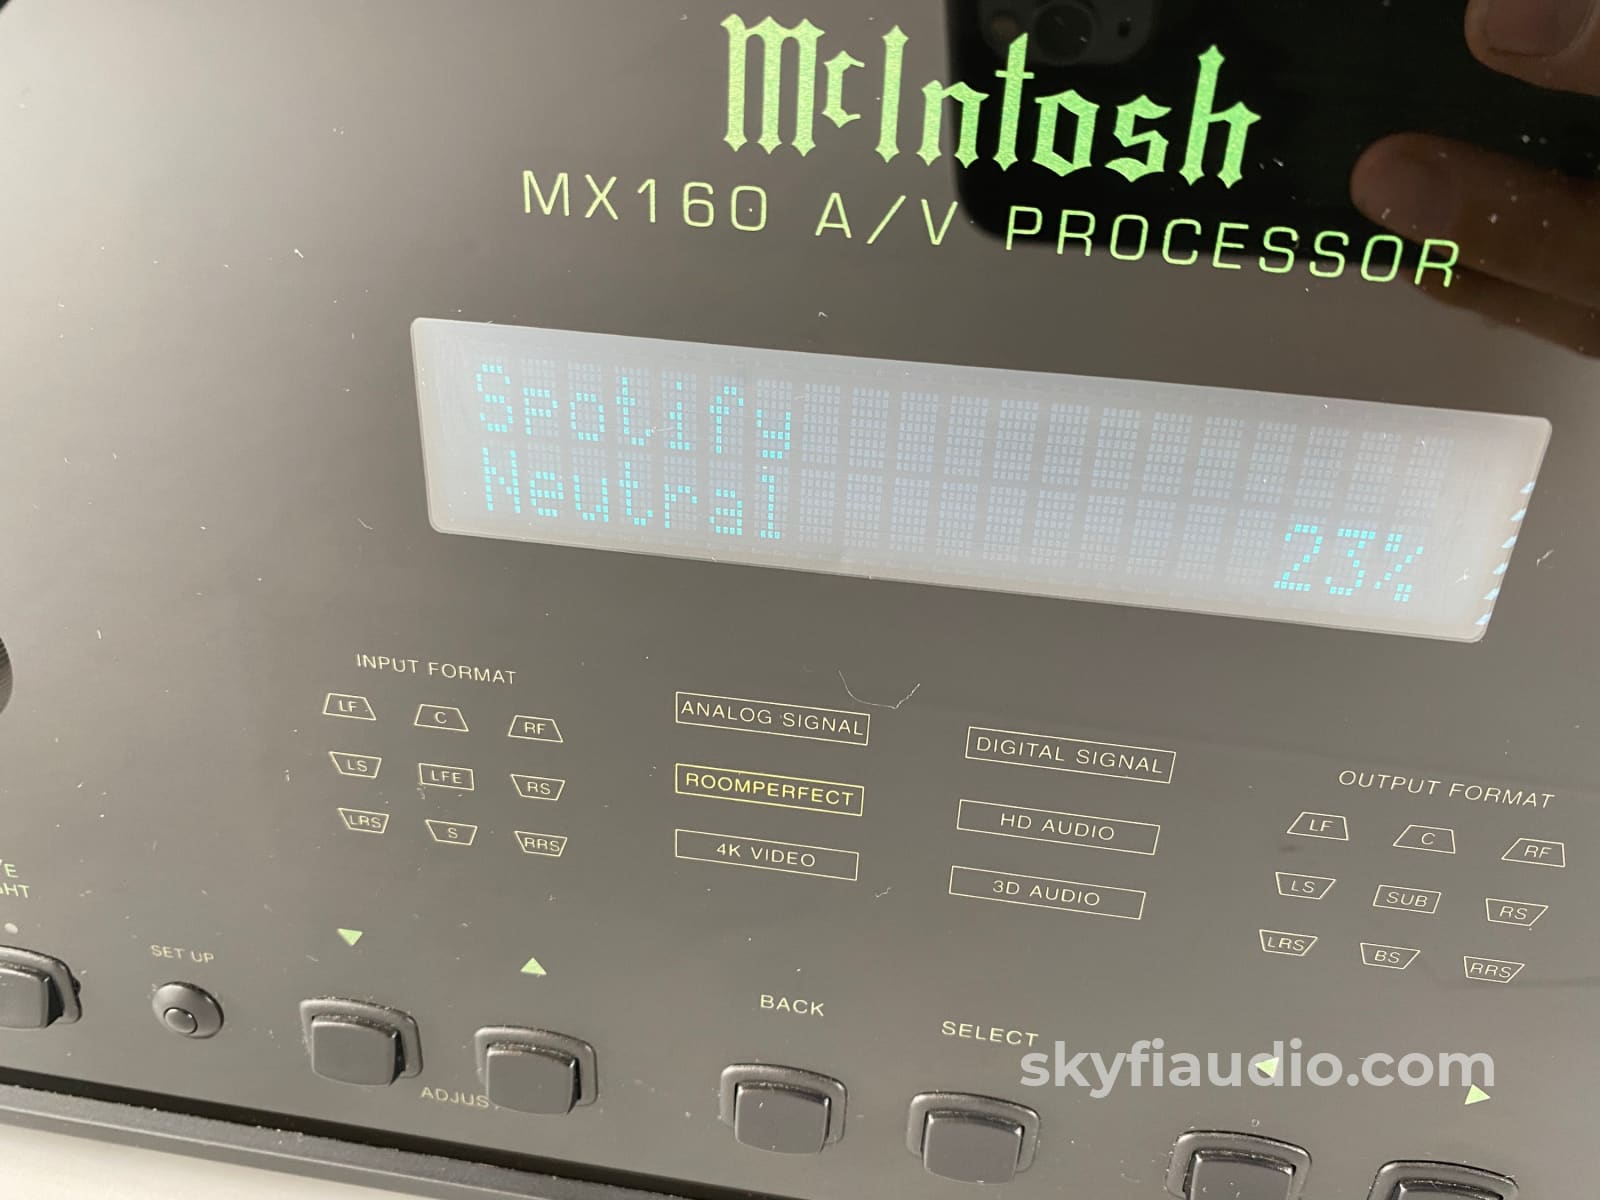 Mcintosh Mx160 Home Theater Processor 4K Ultra Hd Upscaling Dolby Atmos Dts:x Auro-3D Preamplifier